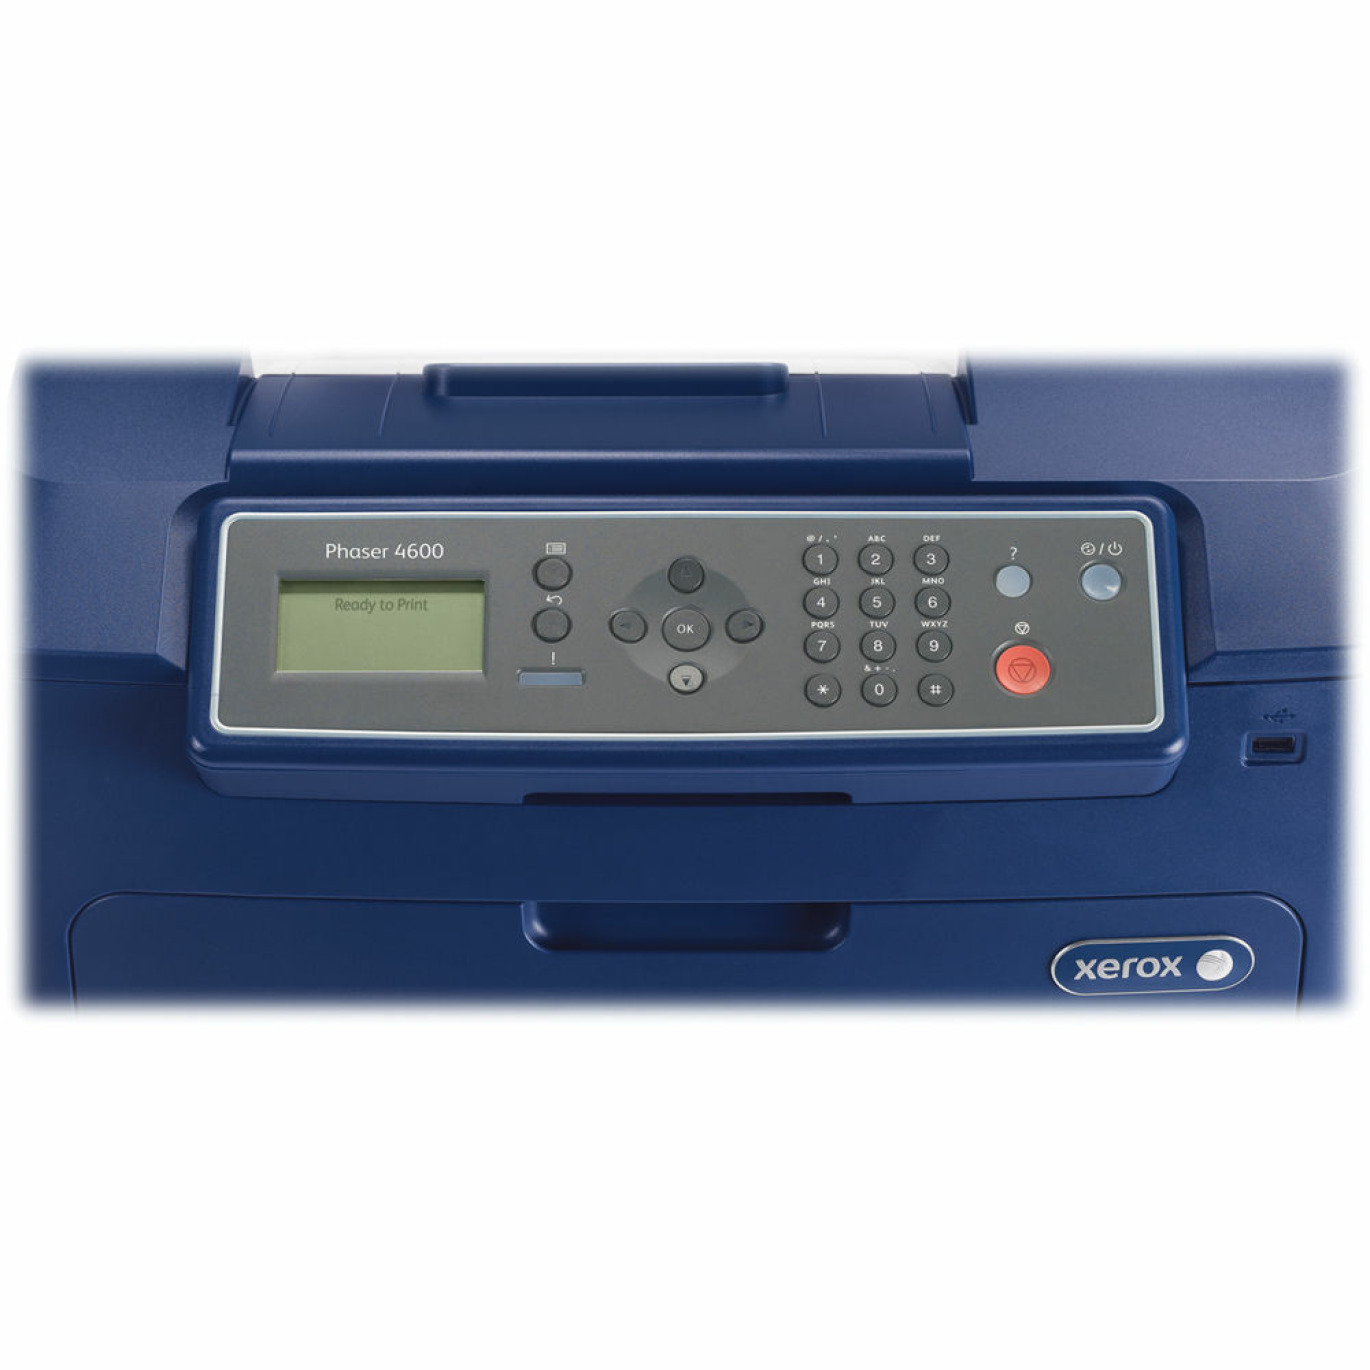 Xerox Phaser 4600 Between 50%-75% Used A Ethernet Usb &lt;300K pages A4 A5 B/W Laser-Printer UNL